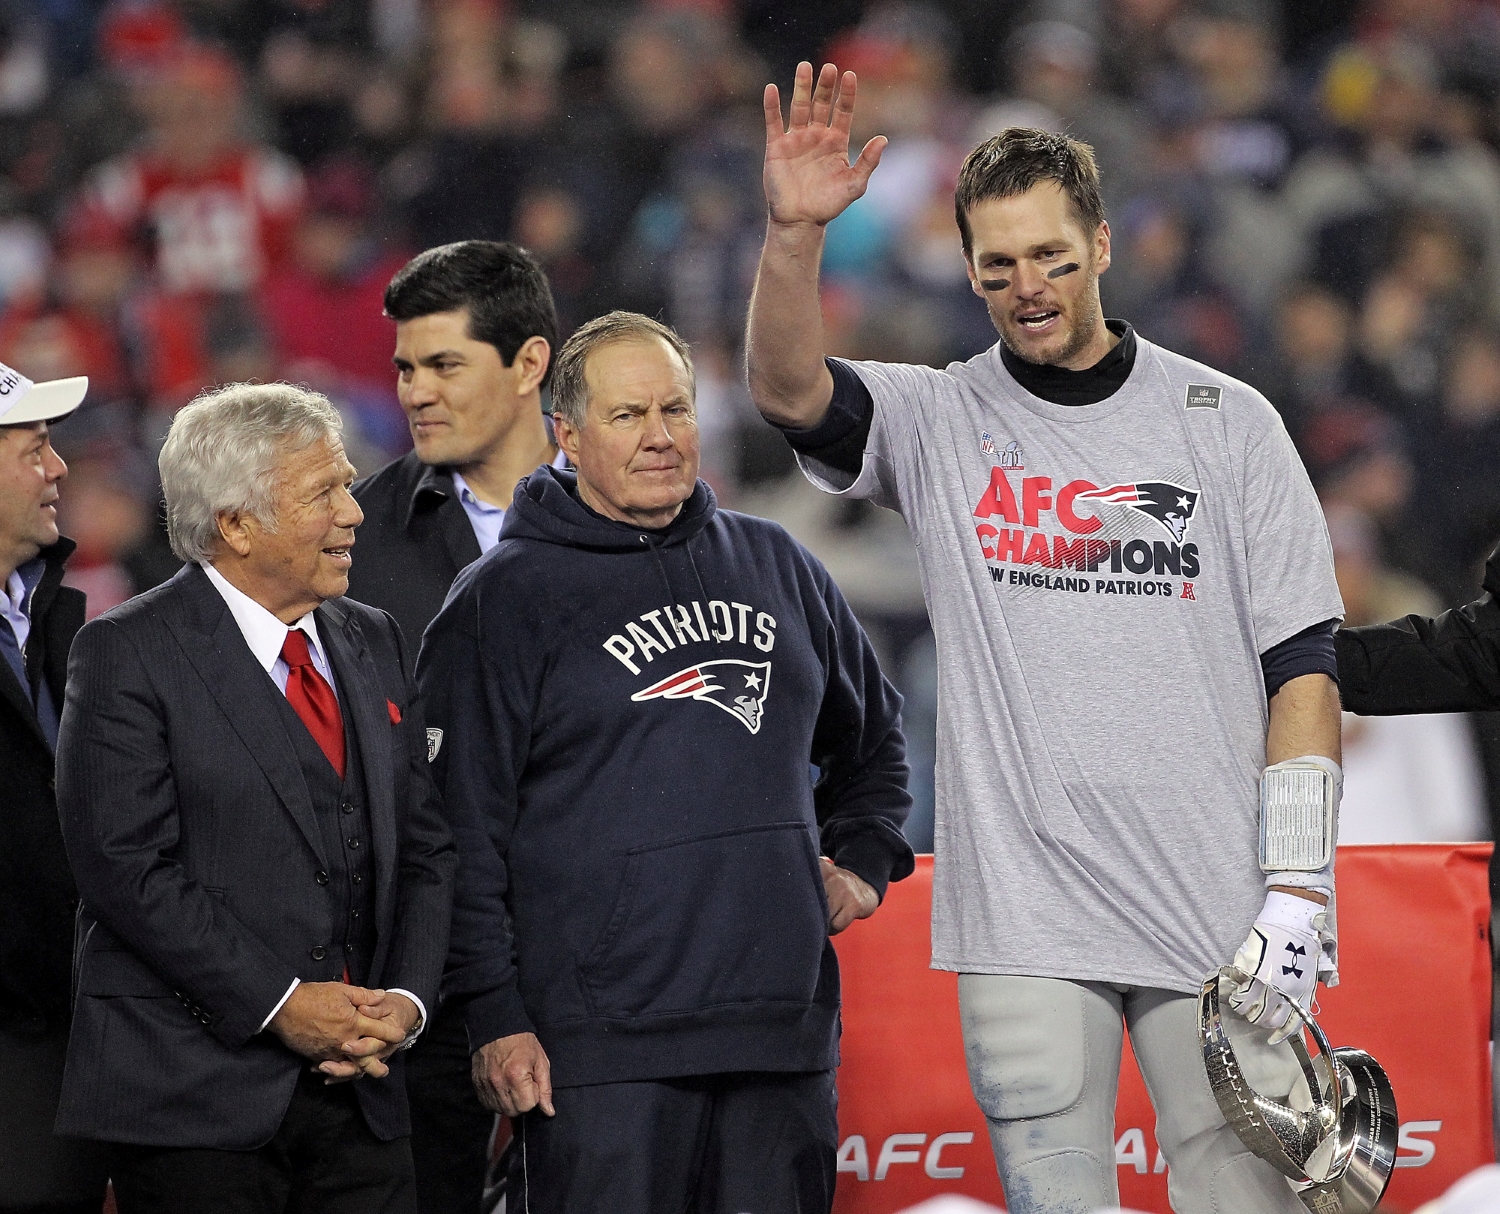 Robert Kraft, Bill Belichick, and Tom Brady stand on stage after the New England Patriots defeated the Pittsburgh Steelers in the AFC Championship.